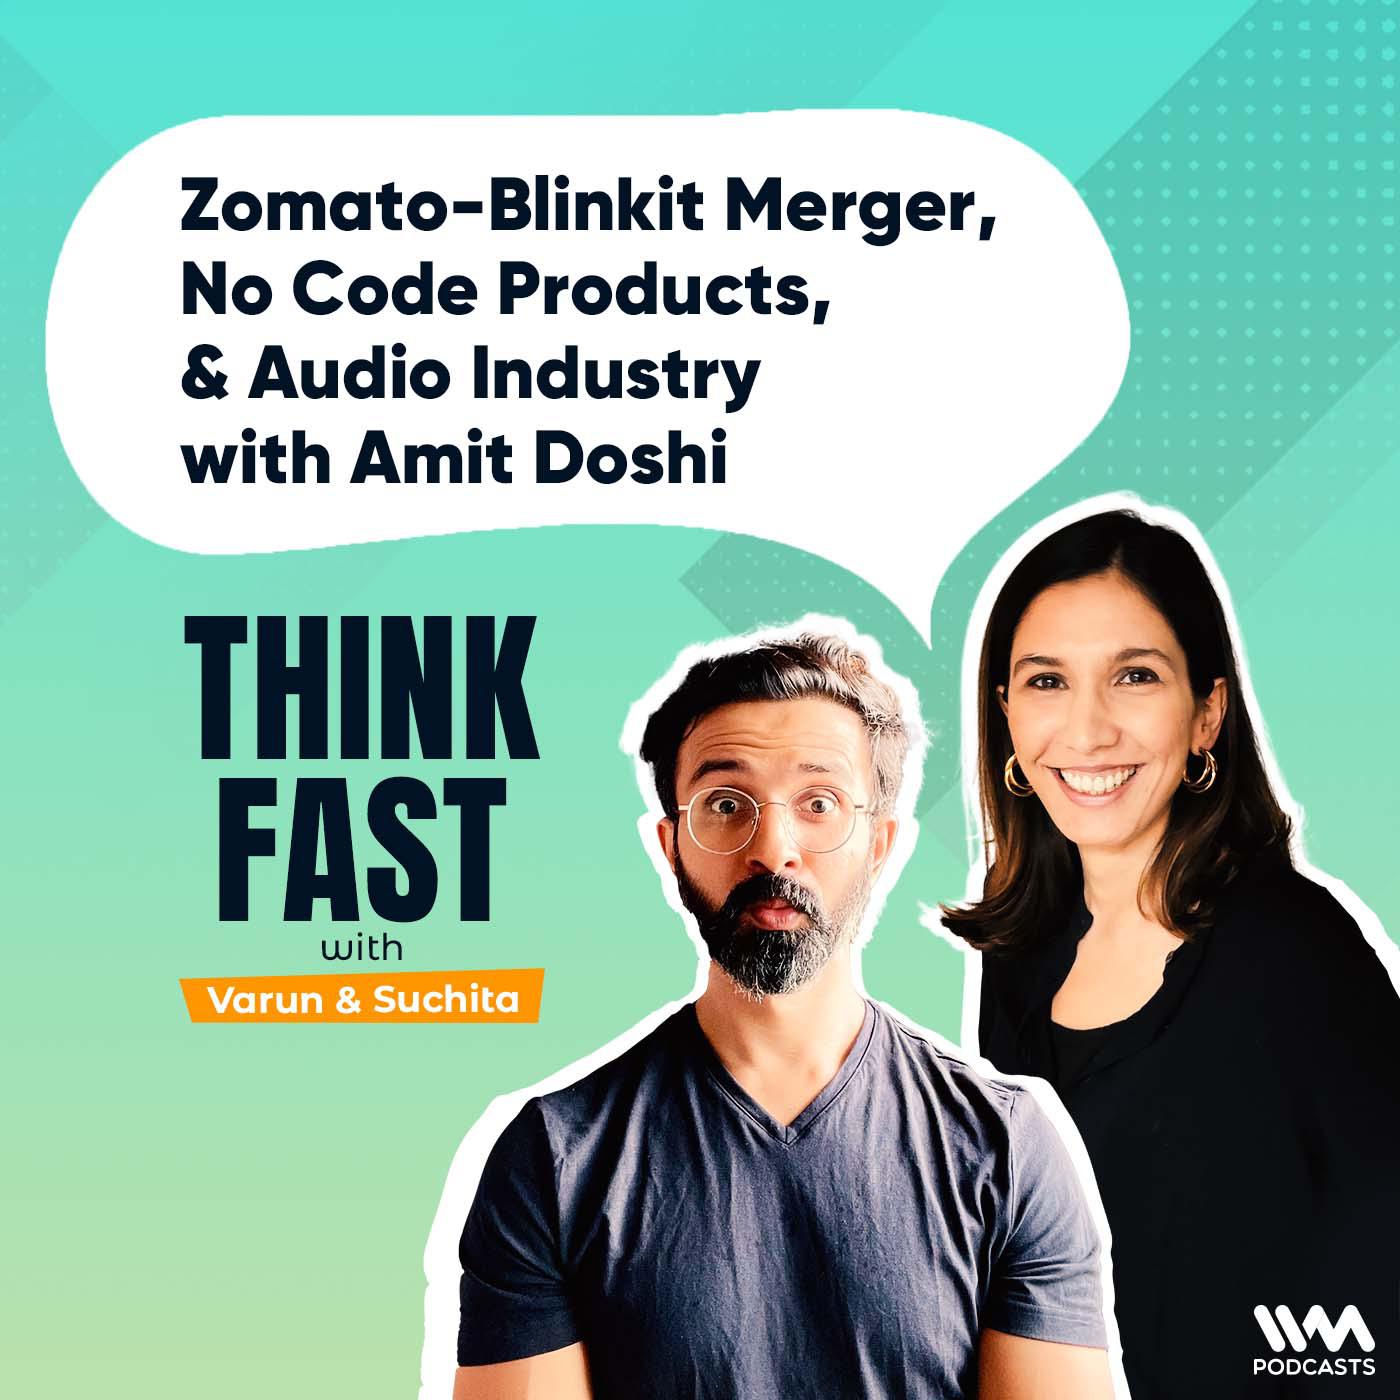 Zomato-Blinkit Merger, No Code Products, & Audio Industry with Amit Doshi